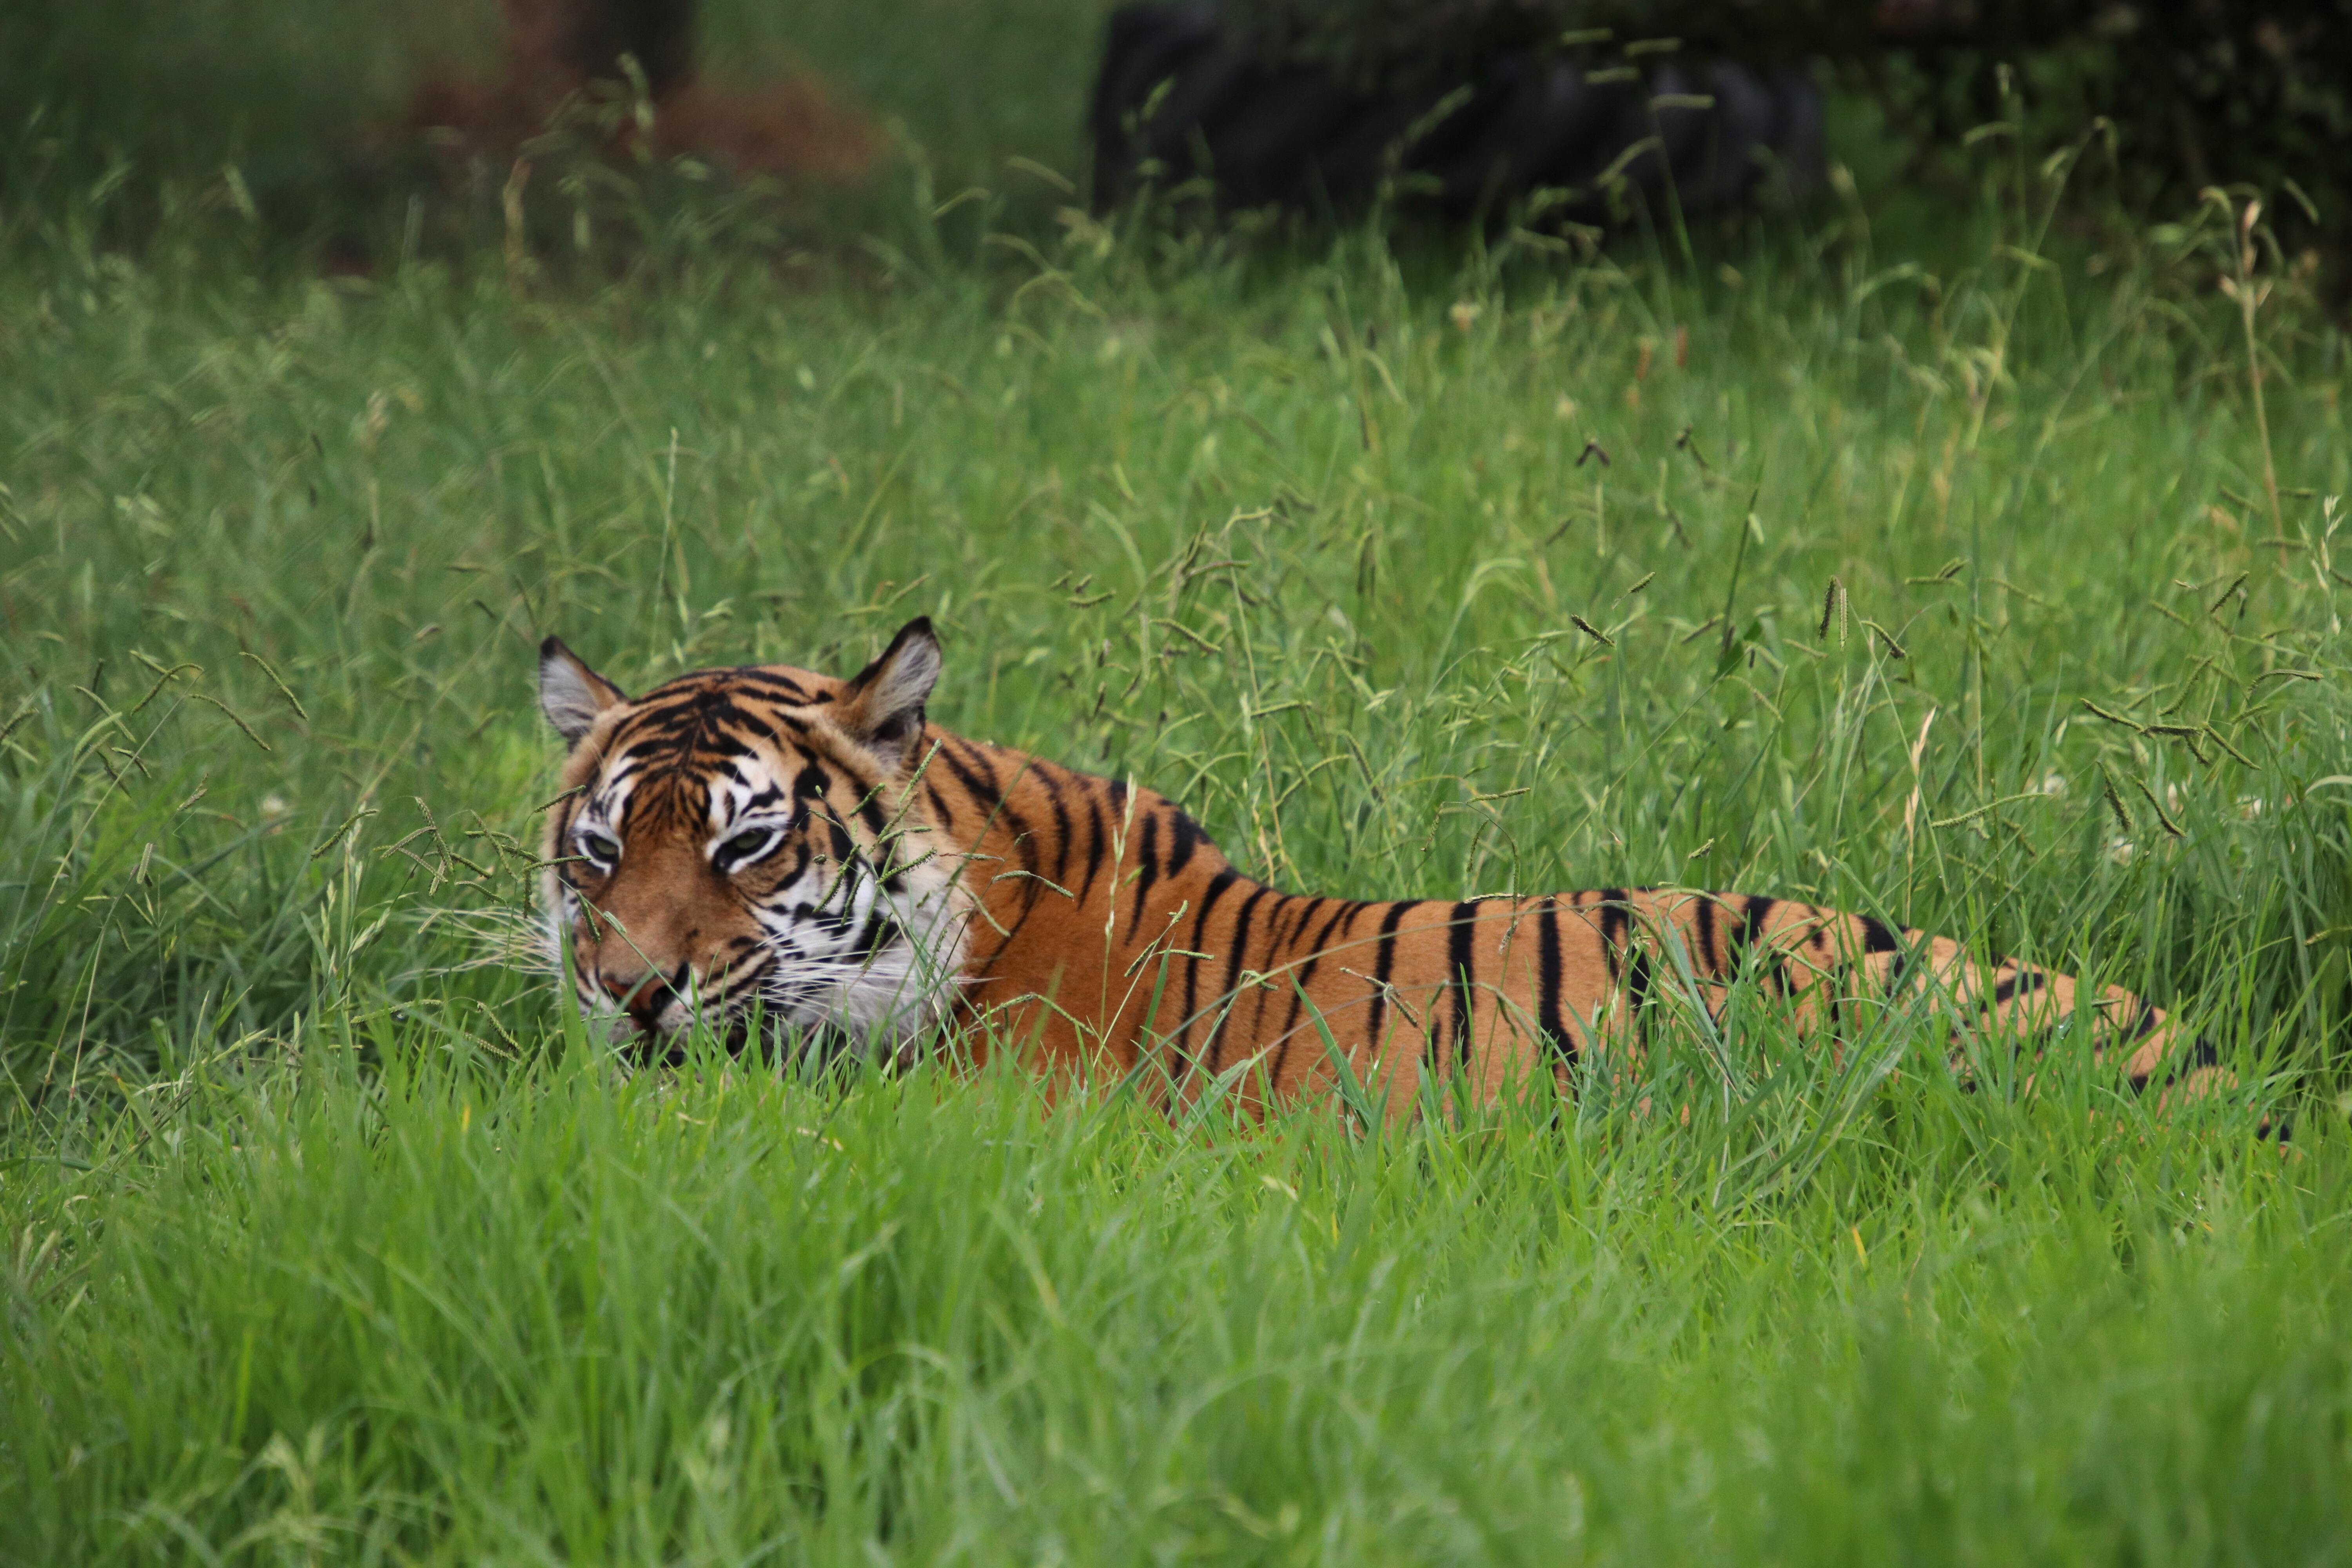 Mum, Kirana, has access to the enclosure and can often be seen on display.